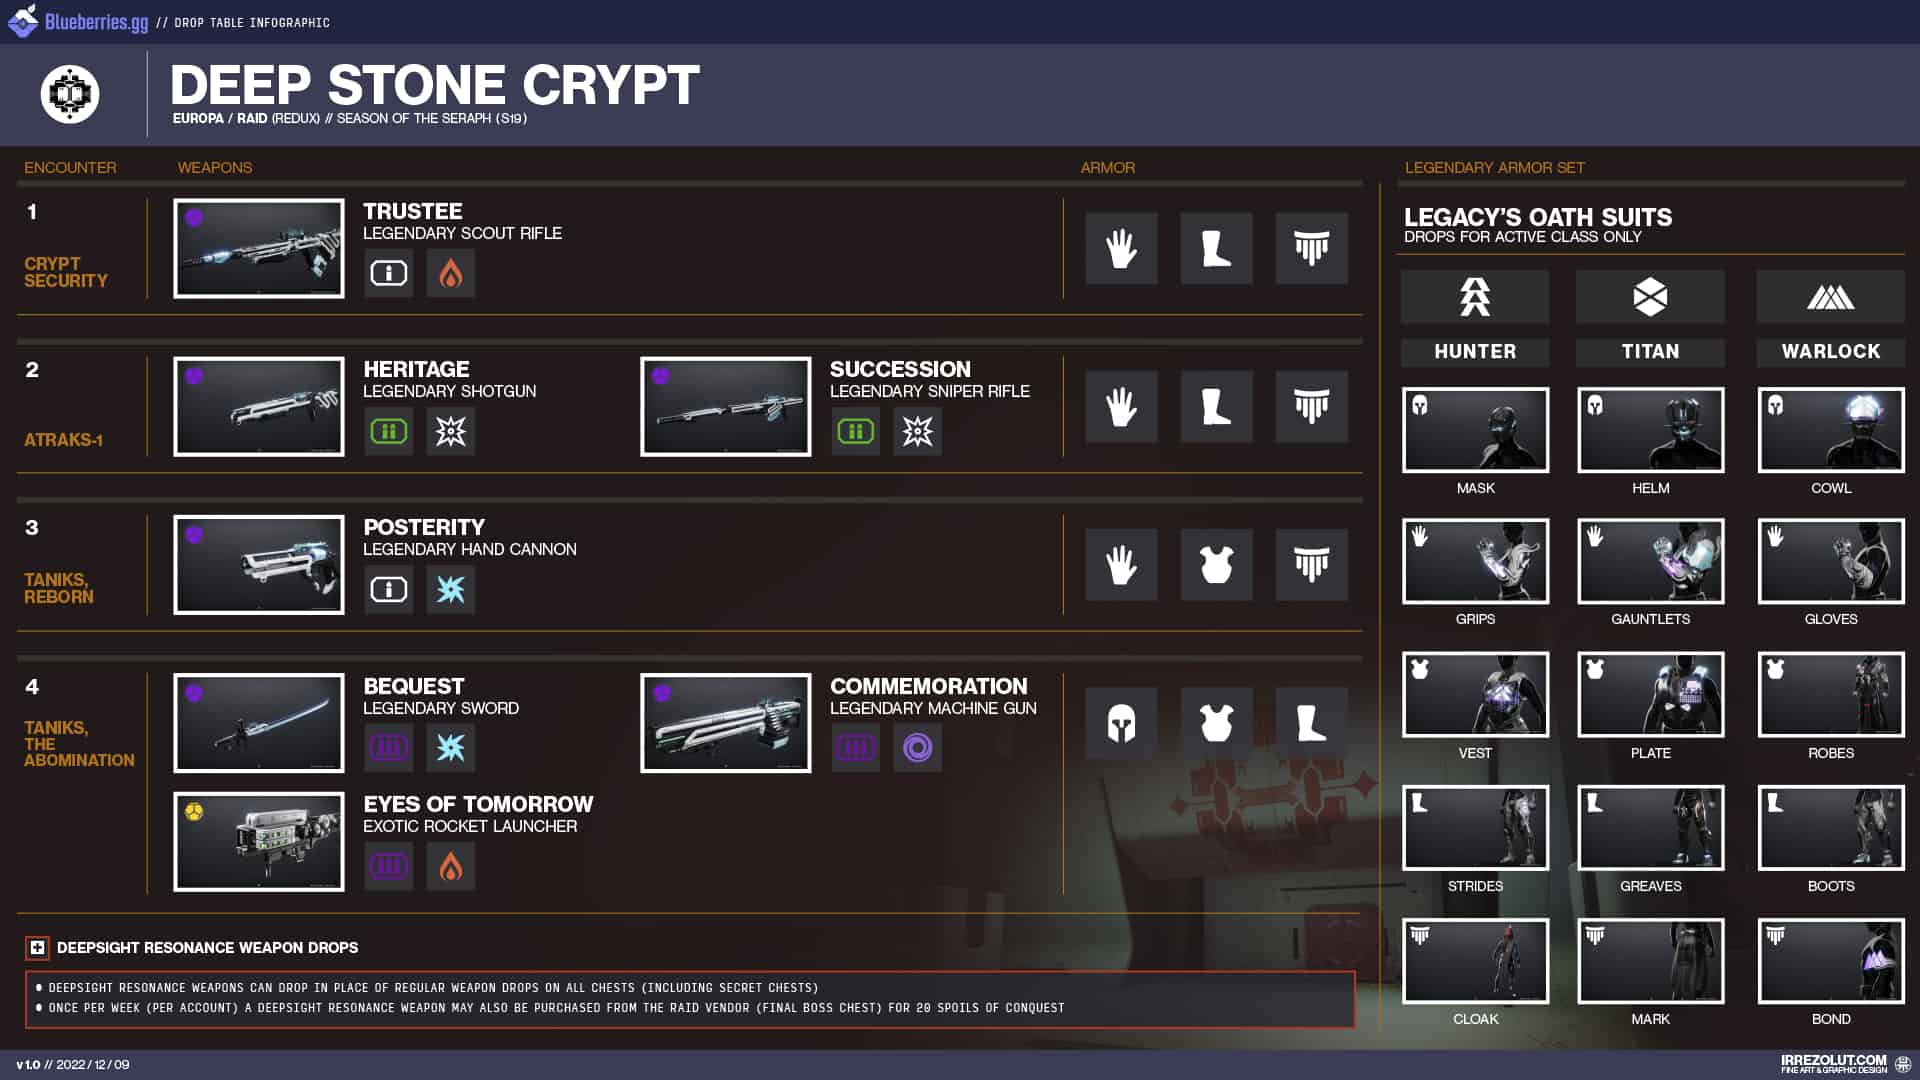 Deep Stone Crypt loot table infographic